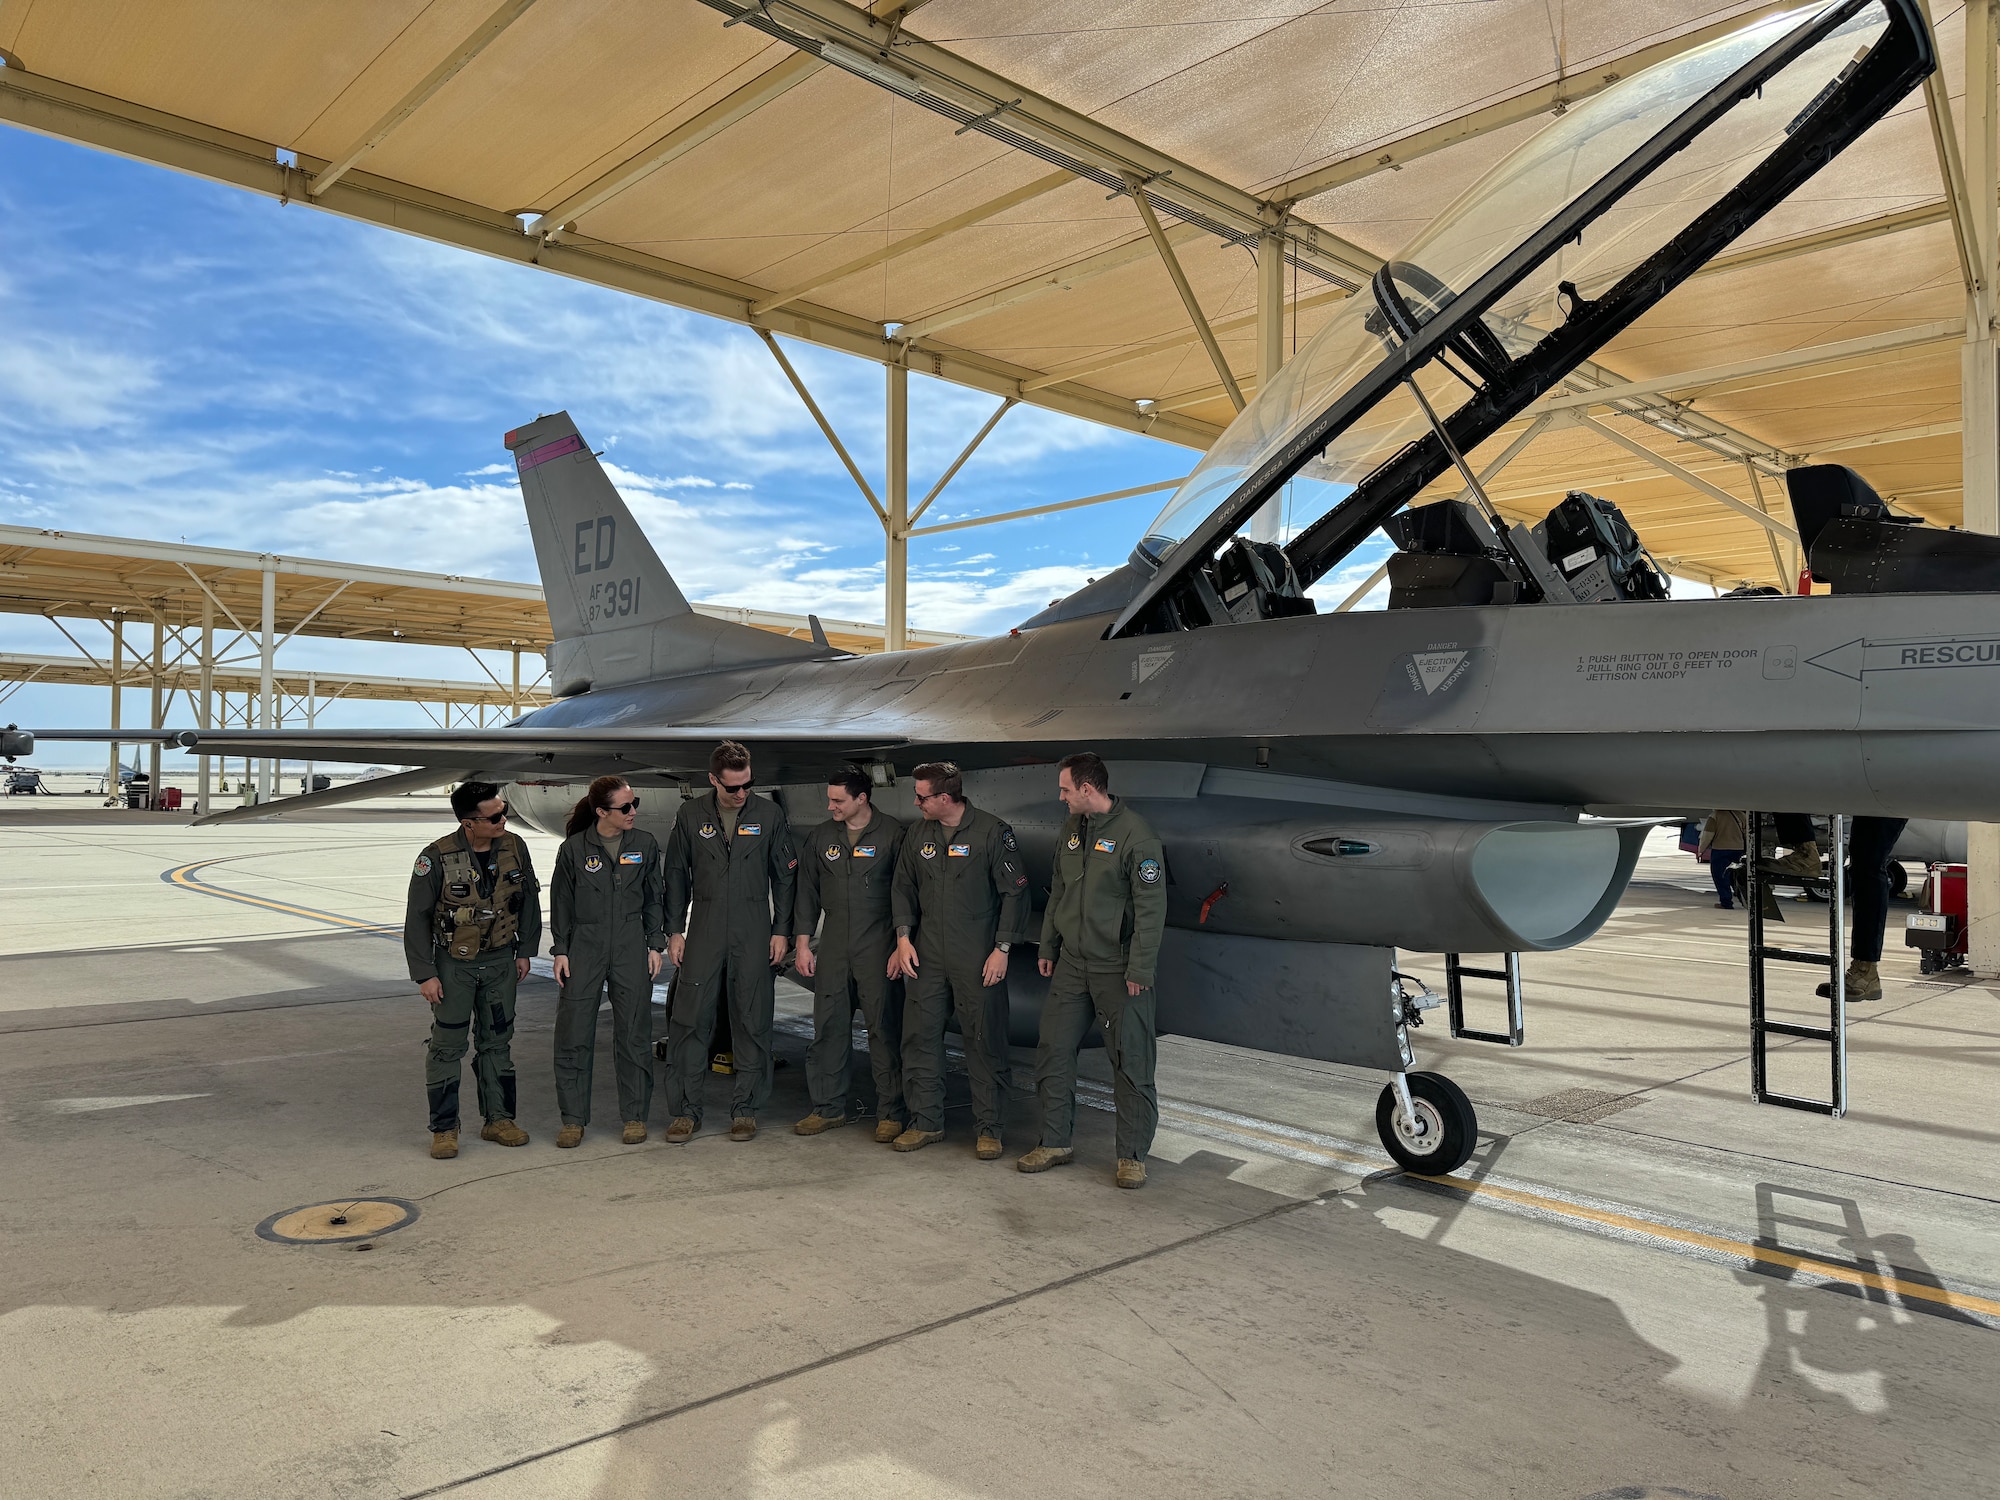 U.S. Air Force Test Pilot School students prepare to flight test the Integrated Cockpit Sensing, or ICS, system on an F-16 at Edwards Air Force Base, California, March 12, 2024. An Air Force Research Laboratory team developed the ICS system to provide an airworthy platform for comprehensive physiological, life-support and environmental monitoring to improve pilot safety and performance. The system has helmet-based, base layer and life- support sensors, ensuring holistic information on the pilot and operating environment during flight. (U.S. Air Force photo / Wei Lee)